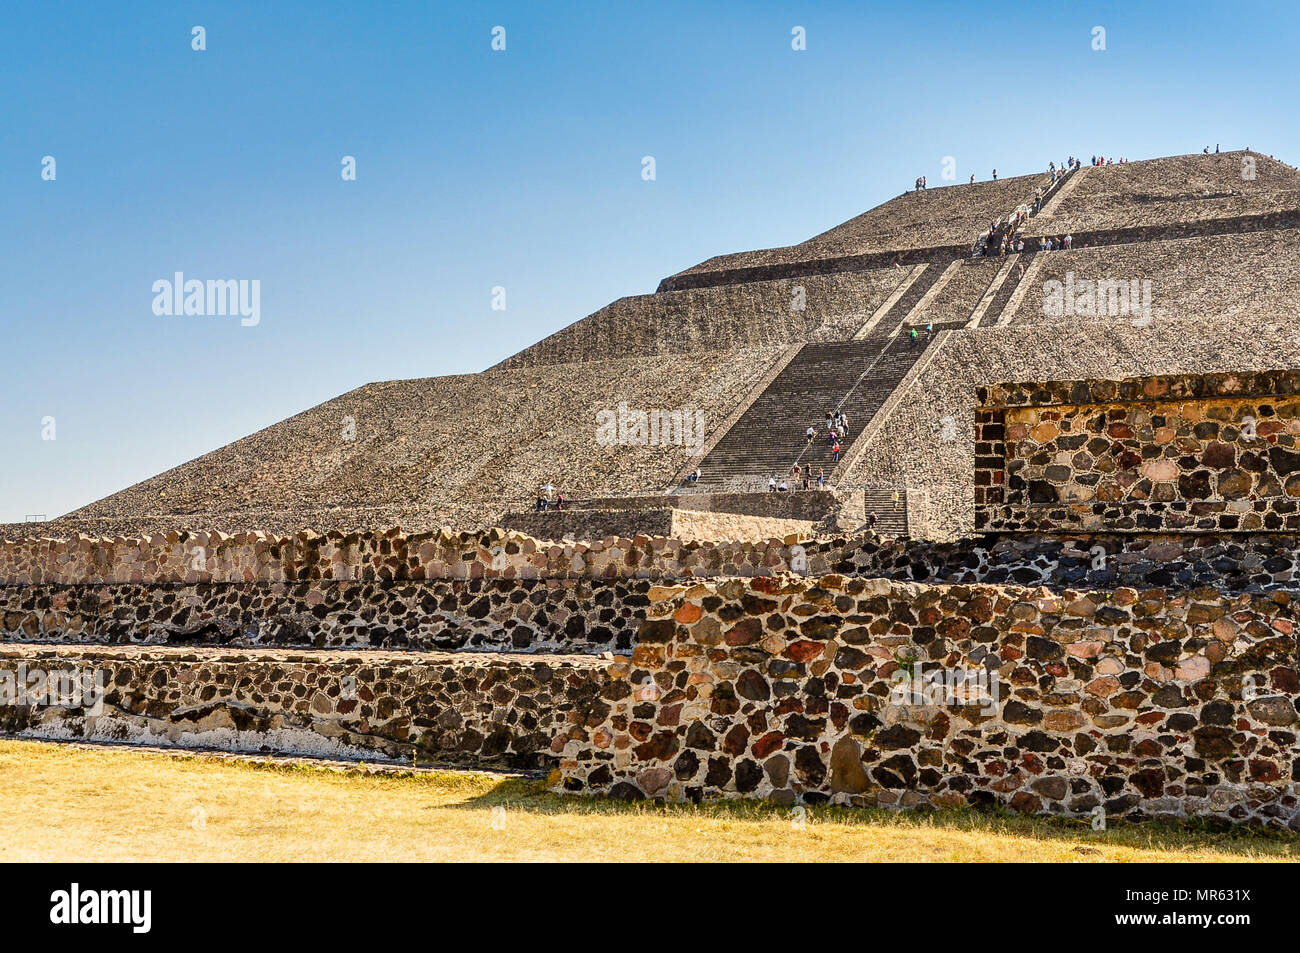 Pyramid of the Sun - Teotihuacan, Mexico Stock Photo